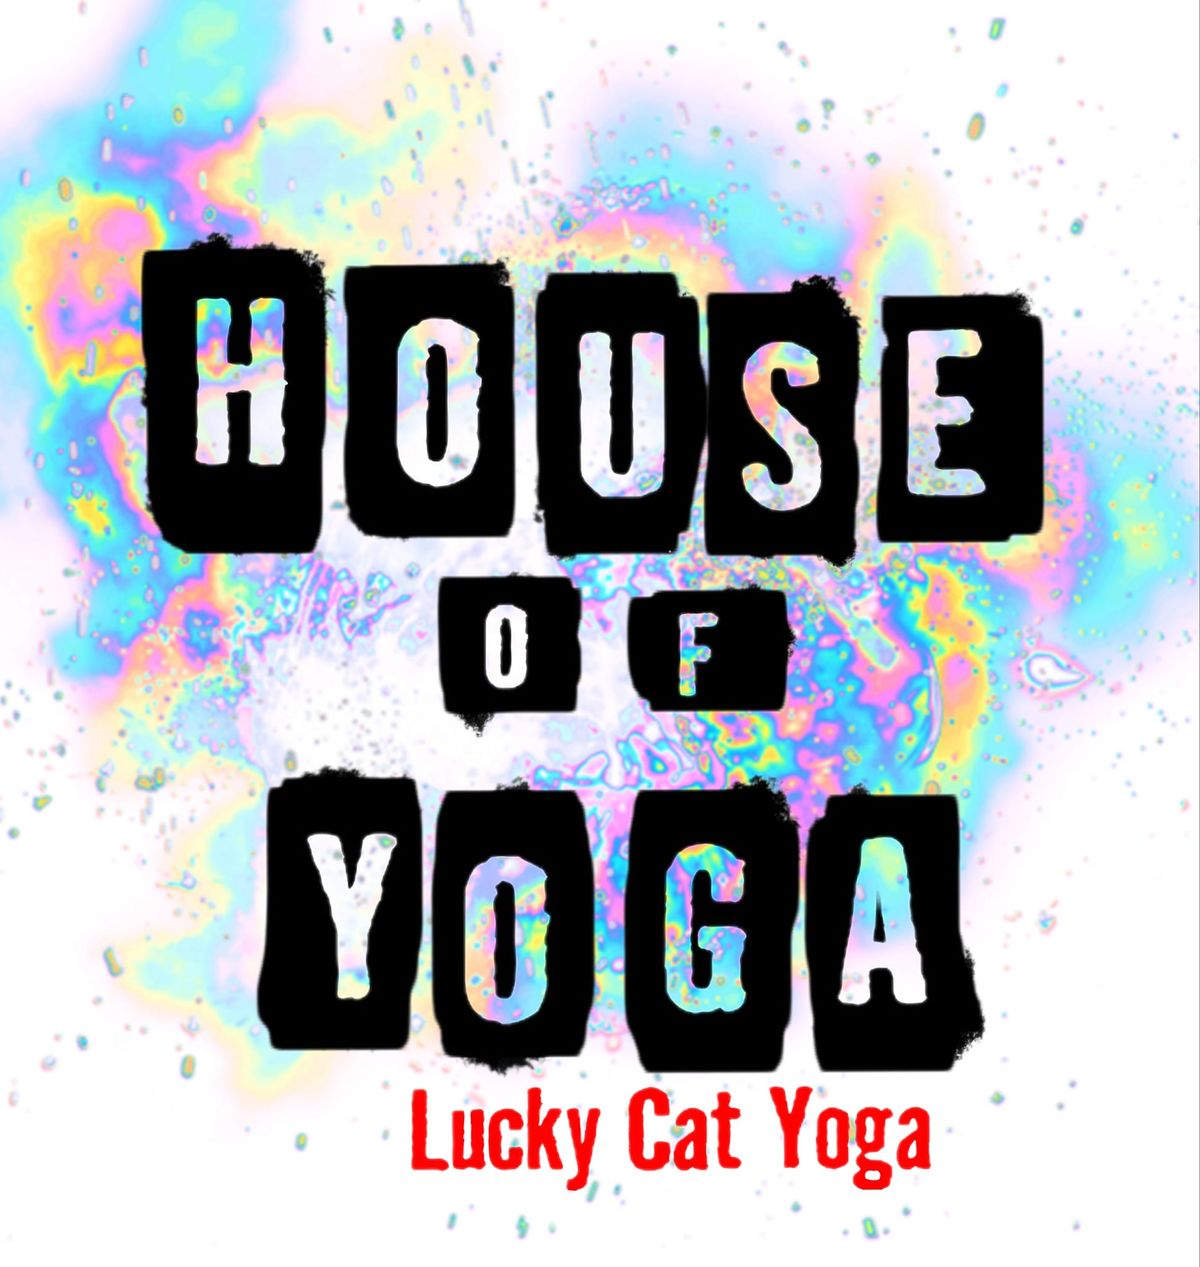 House of Yoga at Lucky Cat Yoga 